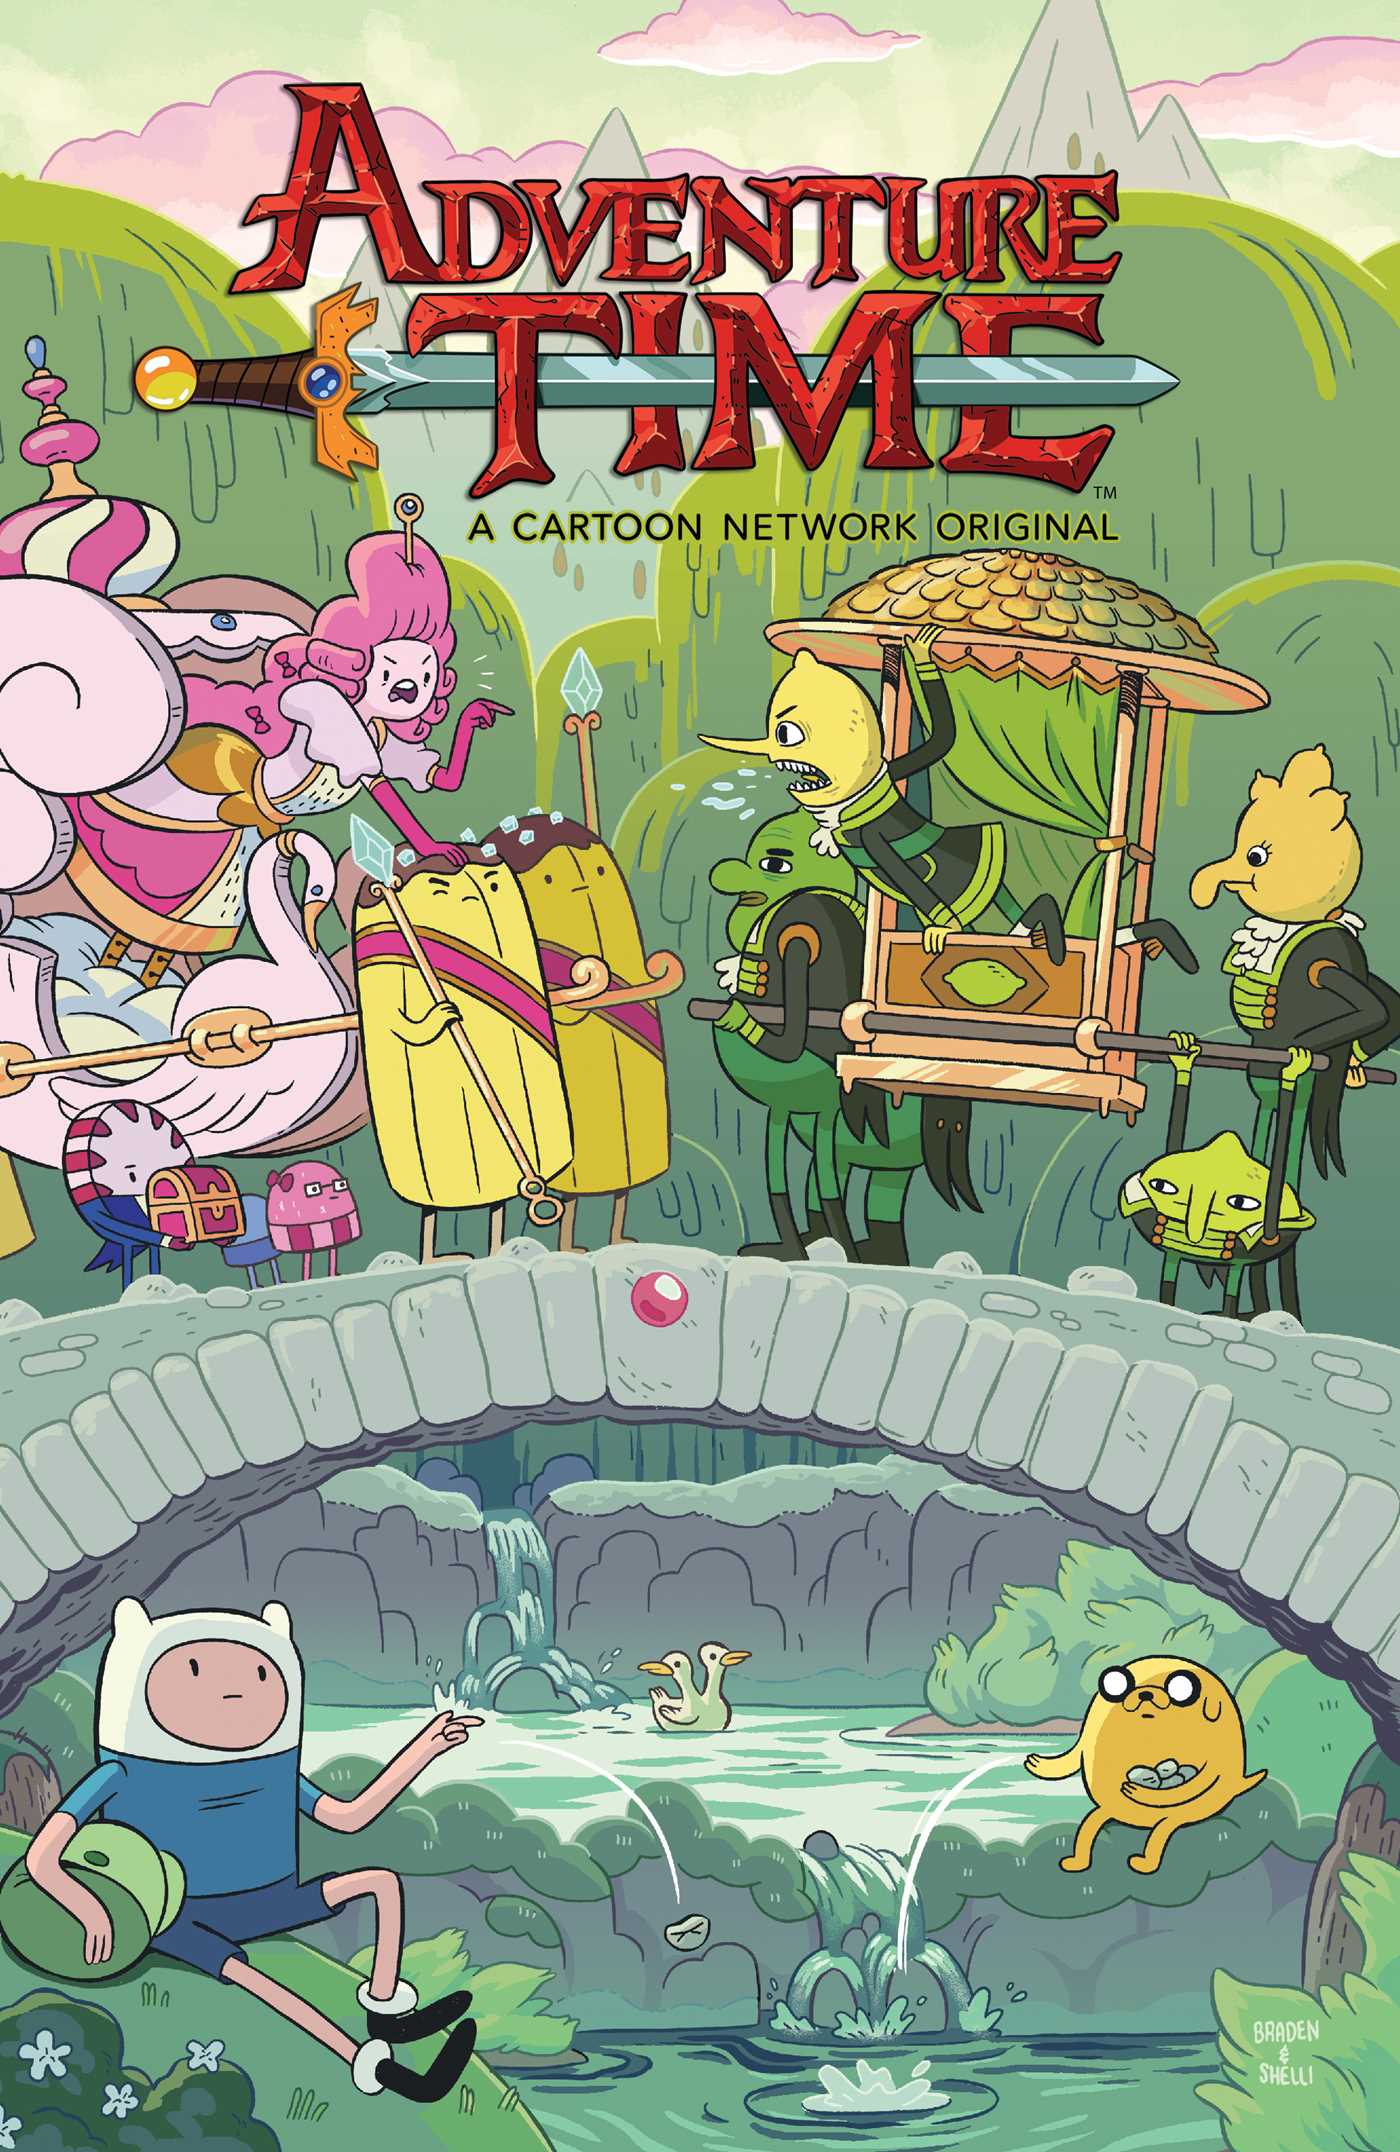 image for PC: Adventure Time Wallpaper and Image